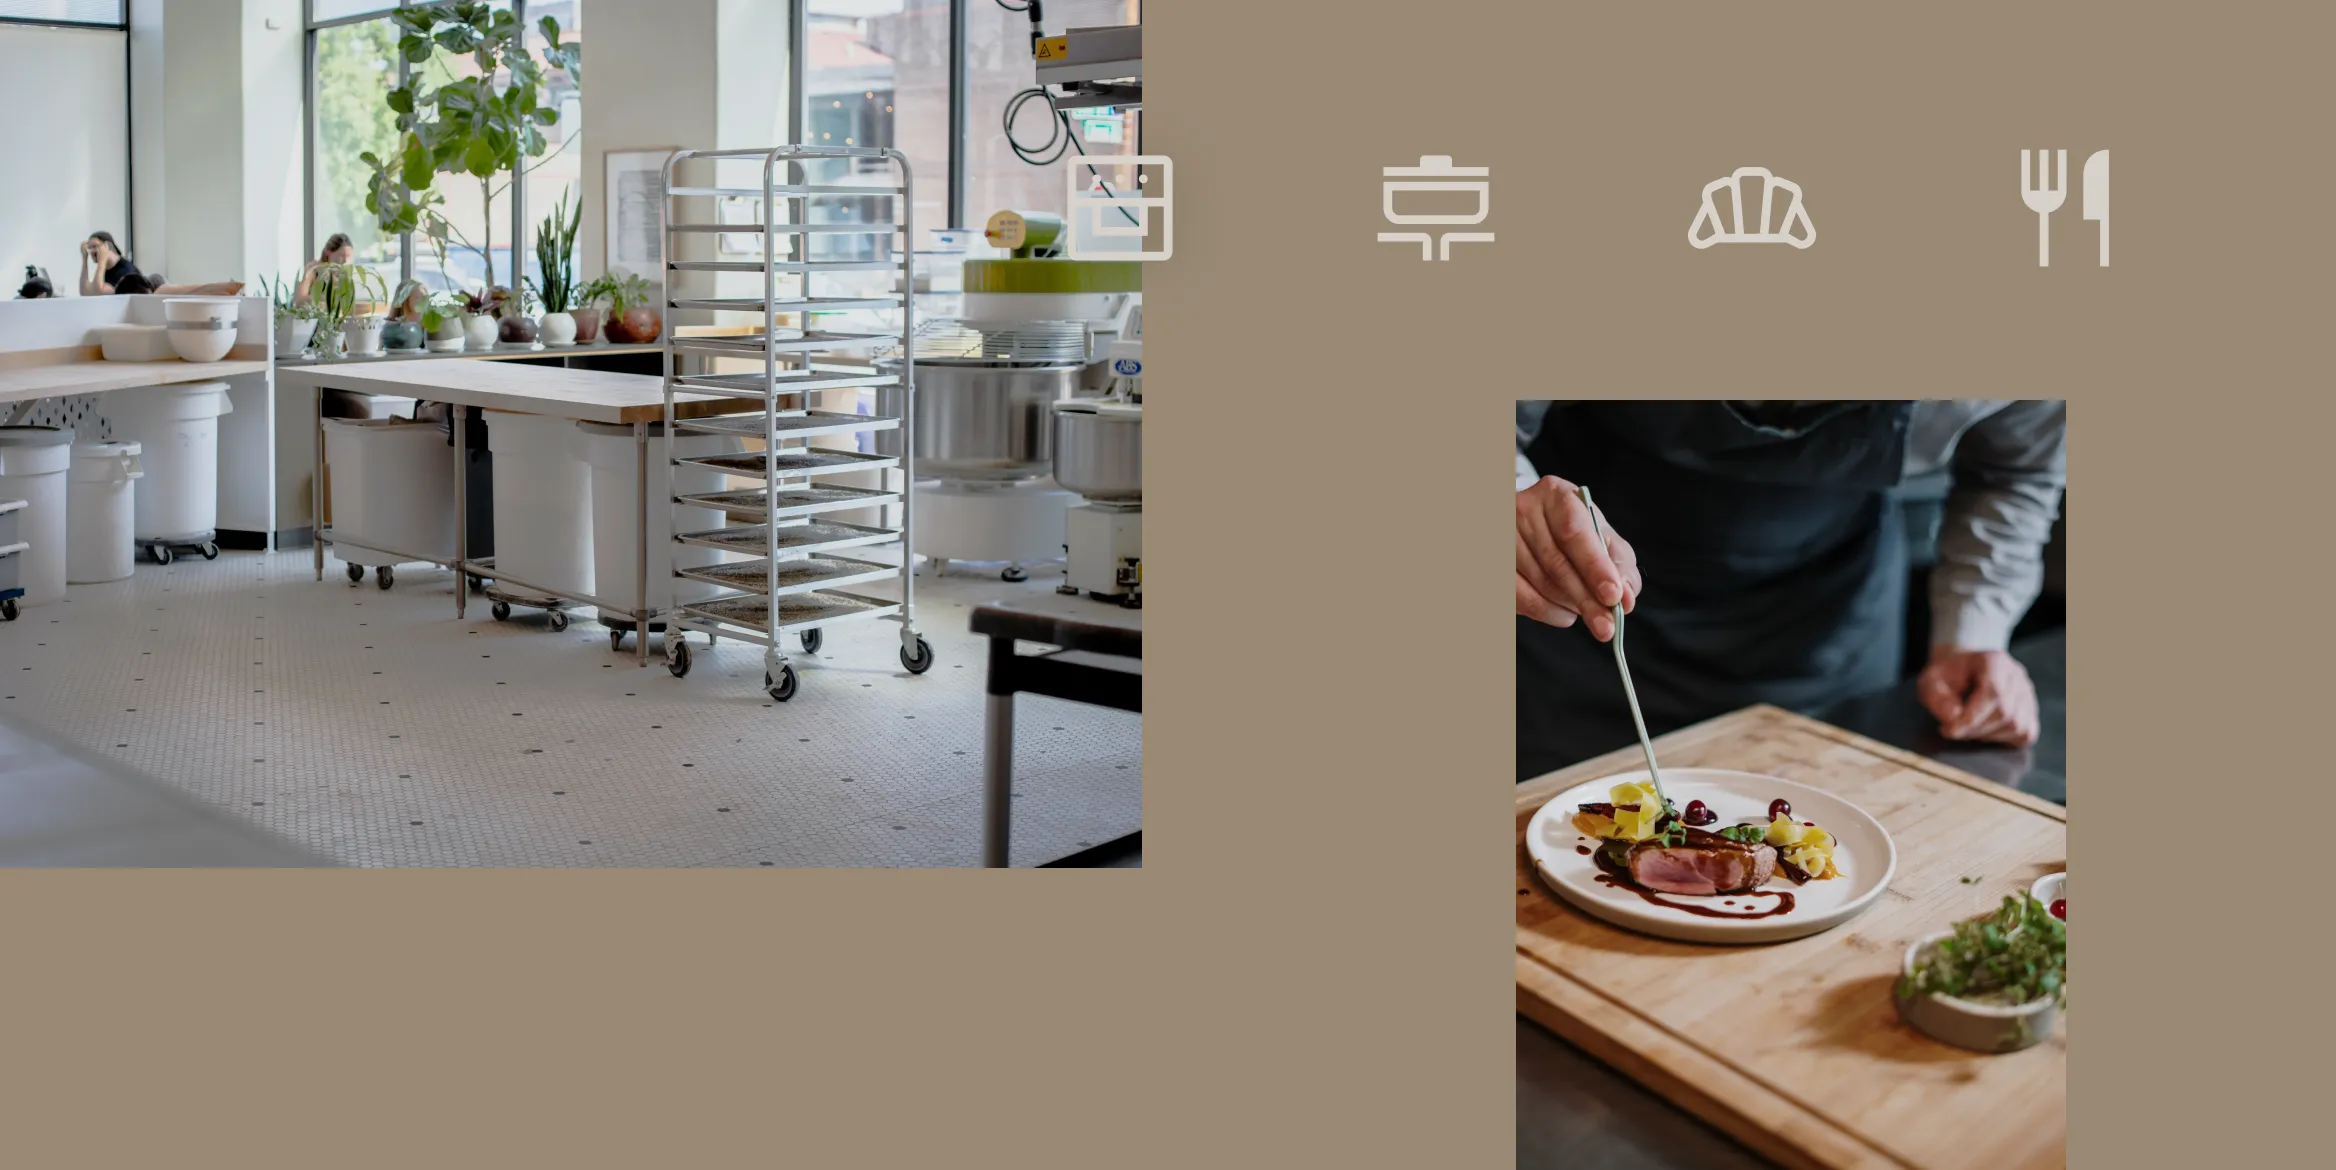 Shared commercial kitchens: a deep dive into flex space for chefsShared commercial kitchens: a deep dive into flex space for chefs